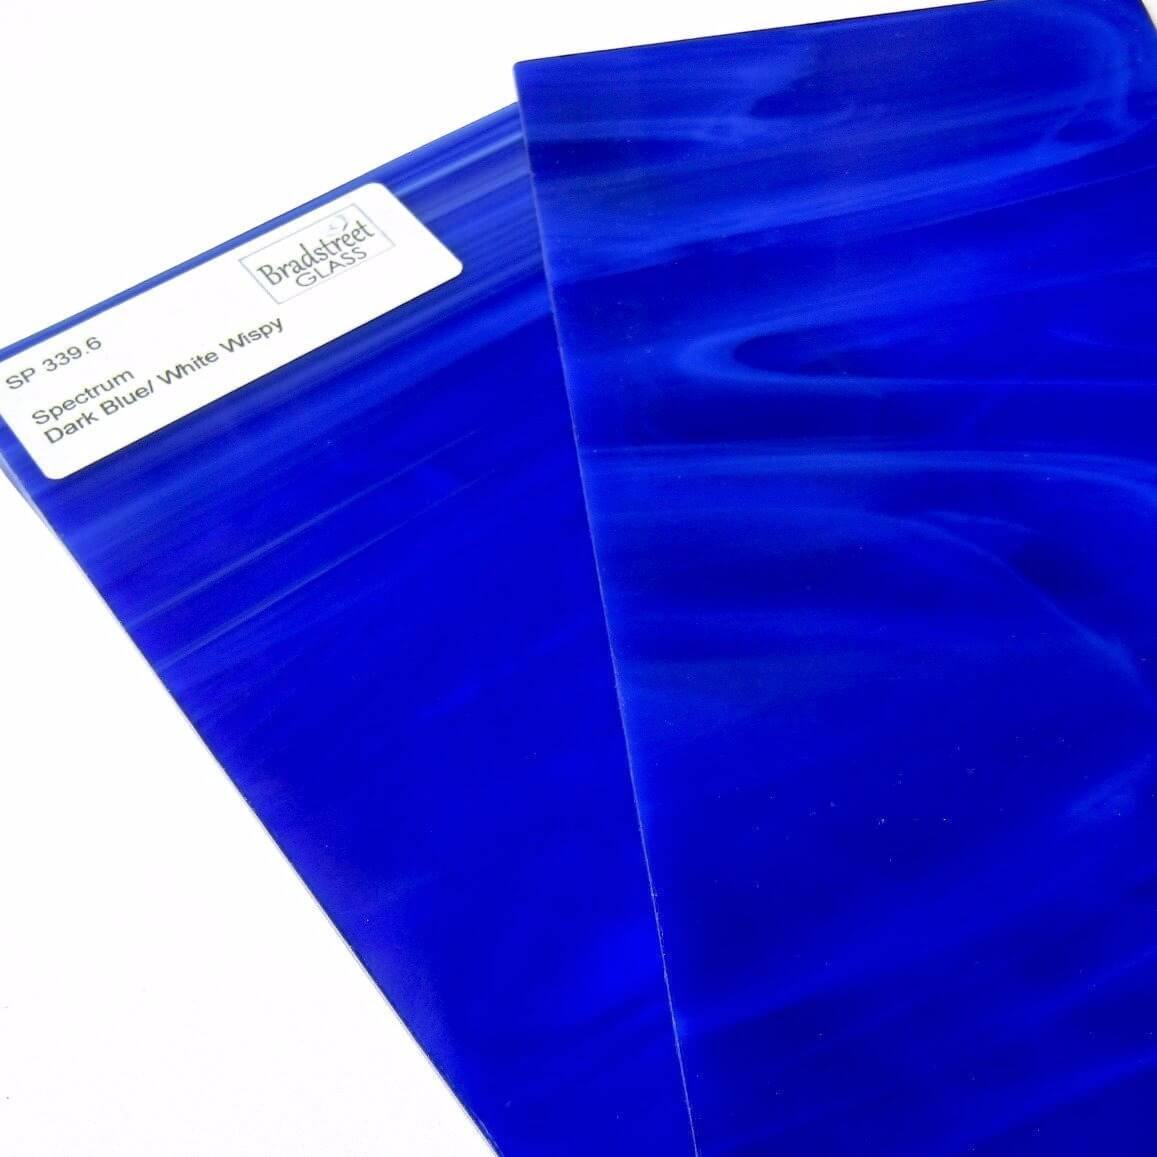 Spectrum SP 339.6 Dark Blue and White Wispy Stained Glass Sample Size Opaque Streaky Swirled